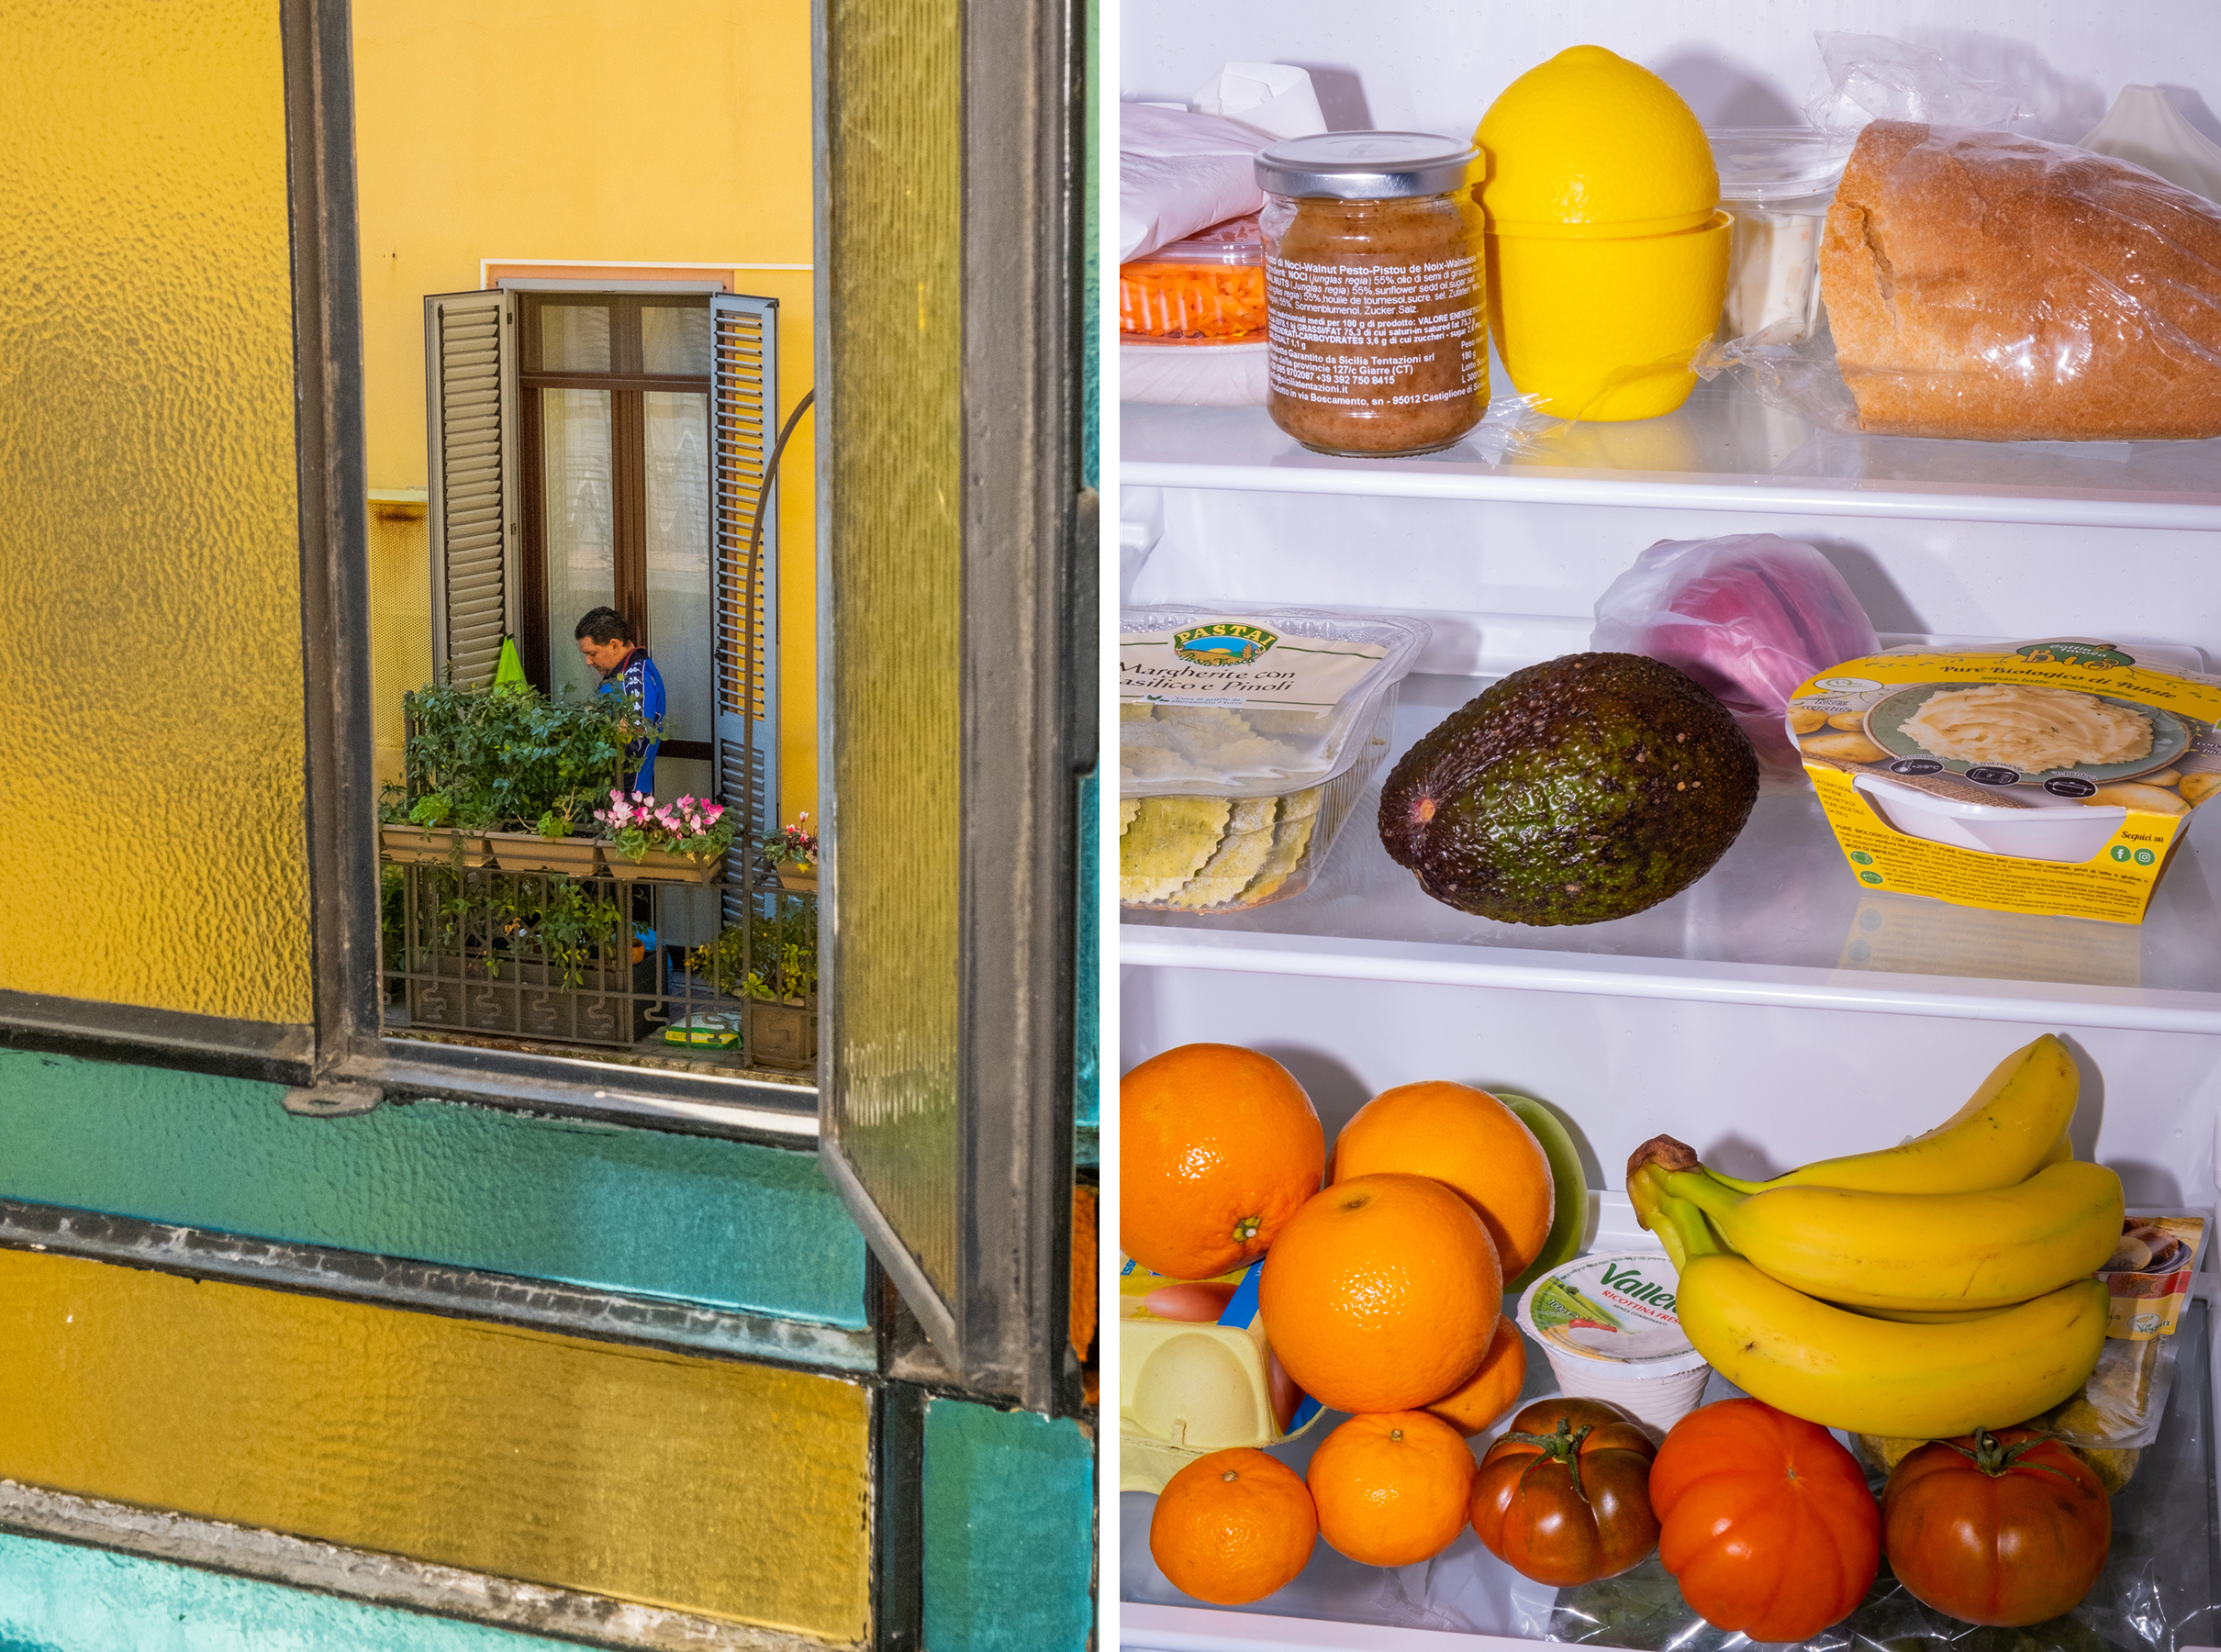 Left: 10:23 A.M. View from the window on my floor; Right: 3:08 P.M. Fridge detail (Lucia Buricelli for TIME)